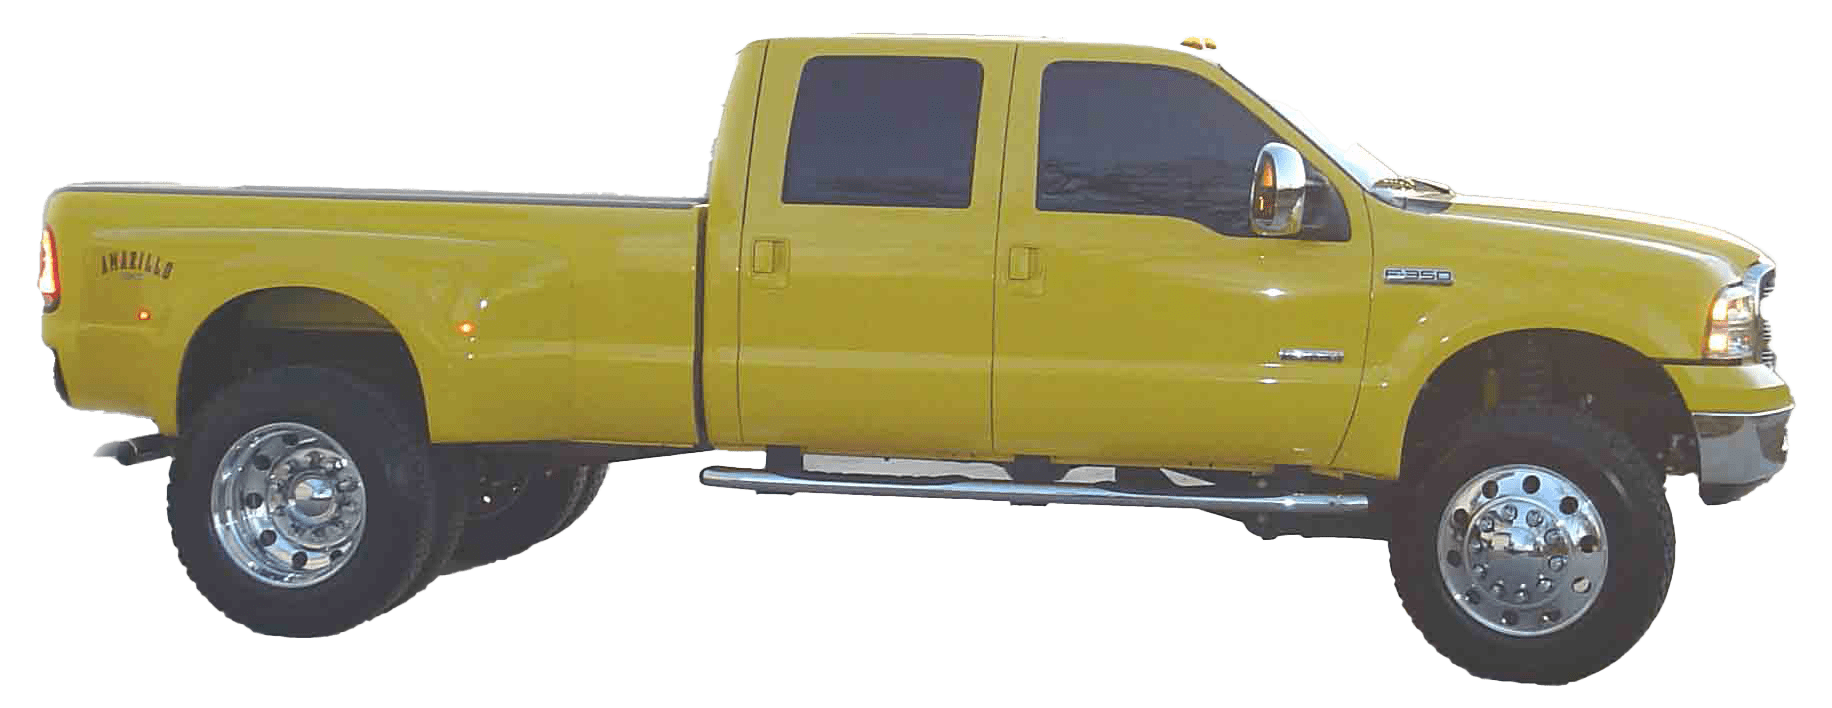 ford f350 dualluy fenders oem replacement long bed 